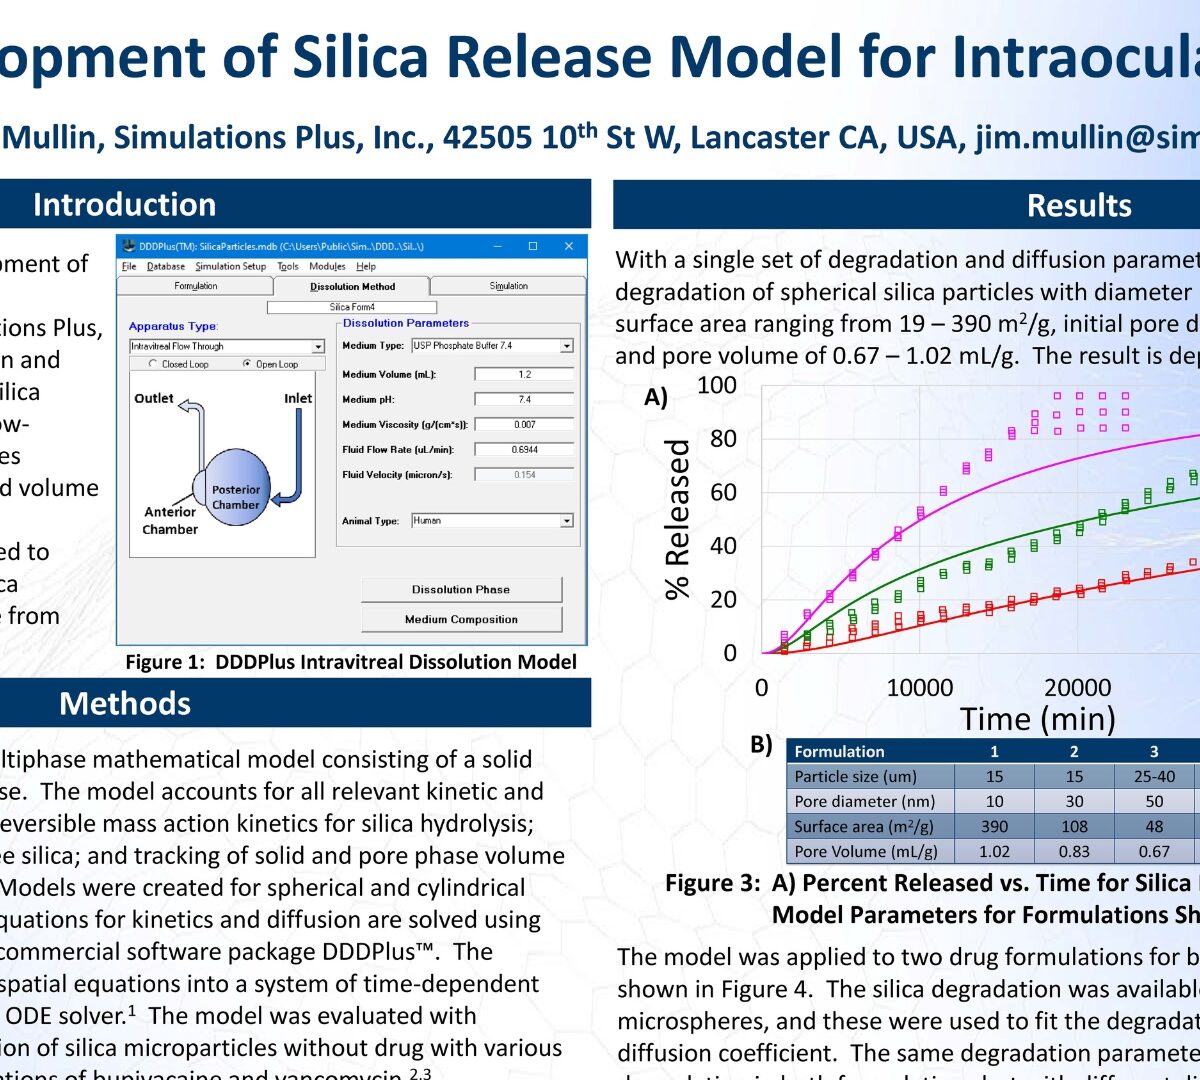 Development of Silica Release Model for Intraocular Injections